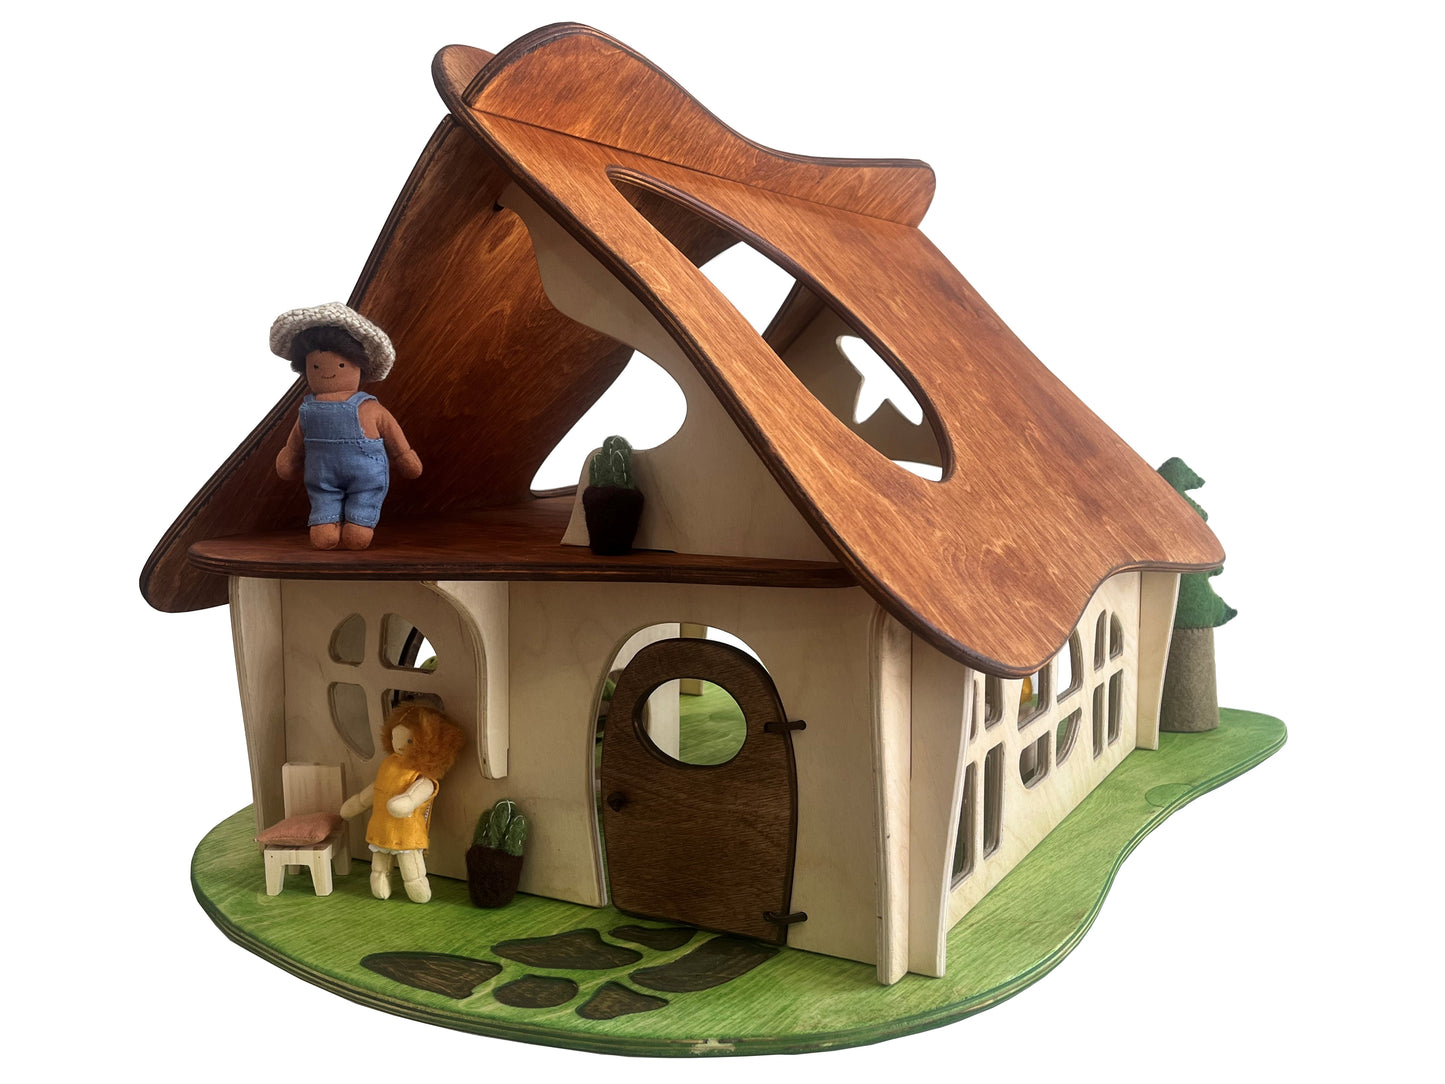 The Enchanting Twig Studio Waldorf-Style Wooden Dollhouse - Perfect for Imaginative Play! Medium Size